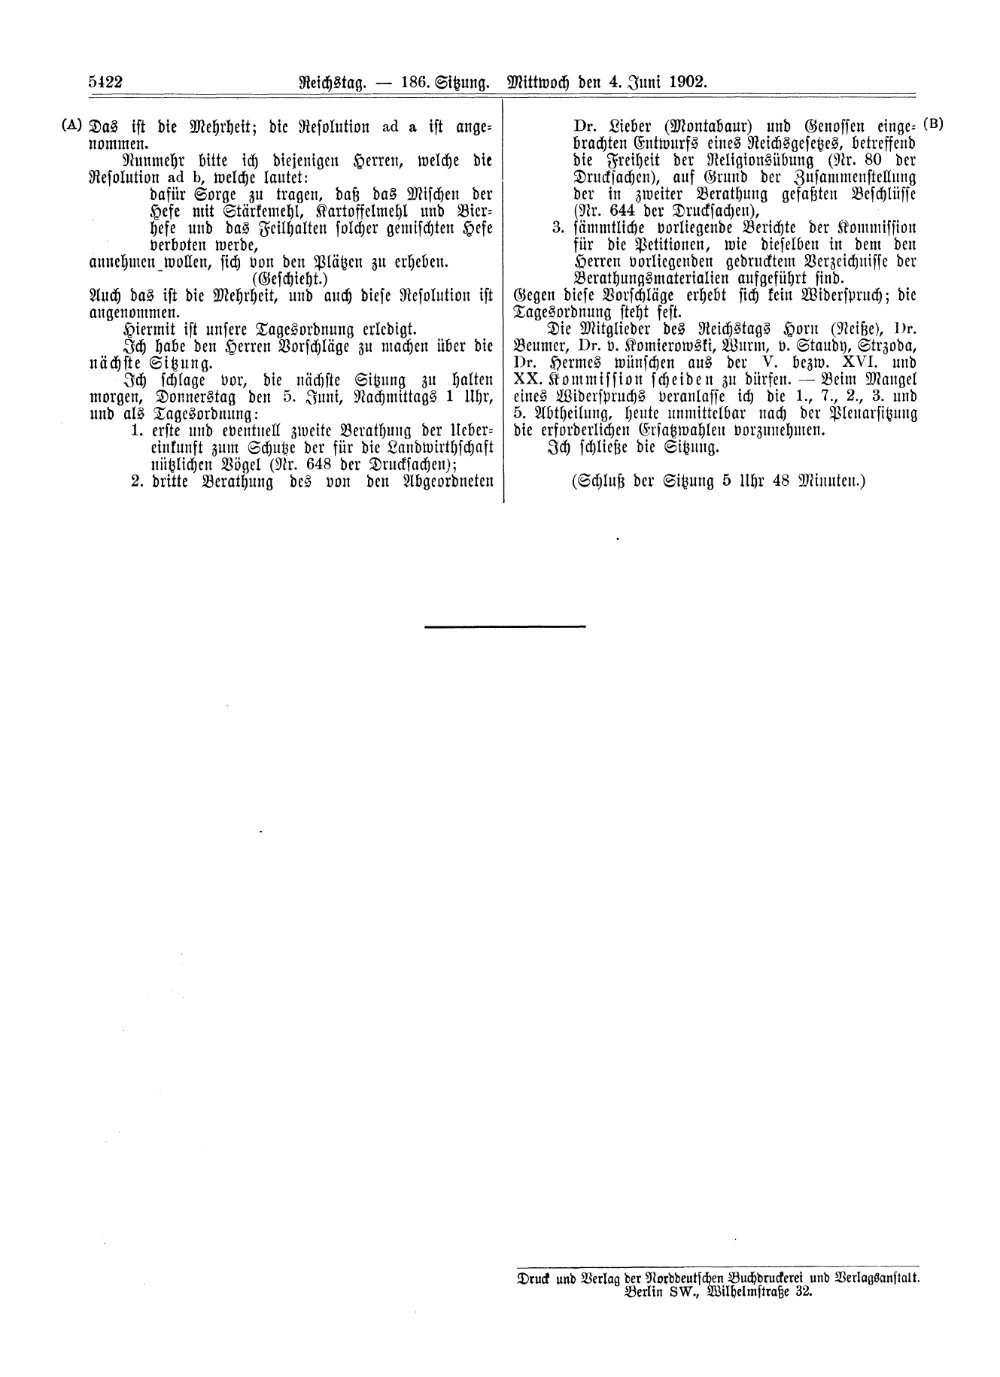 Scan of page 5422